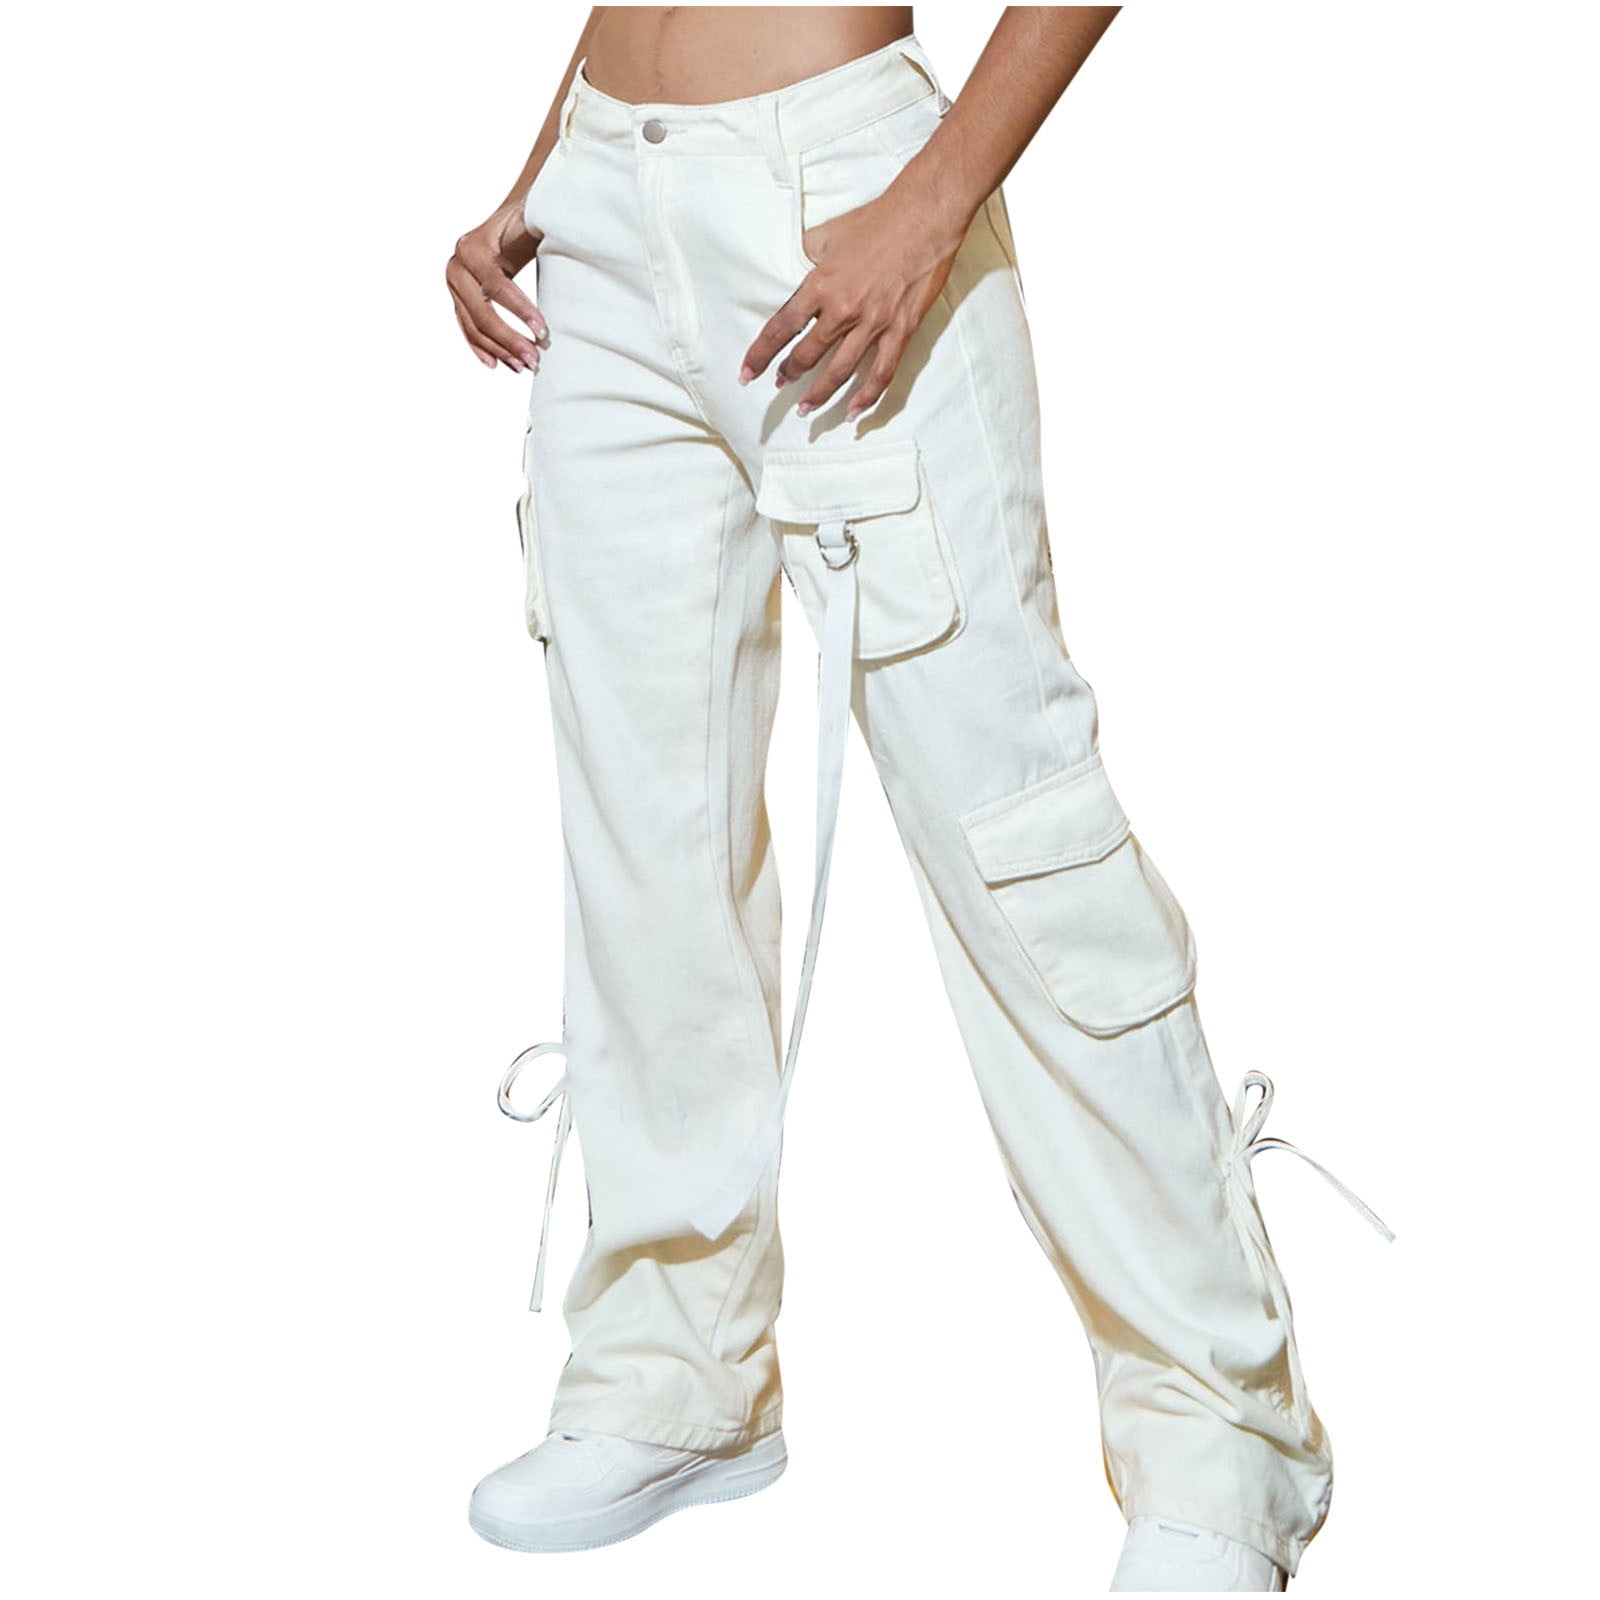 Cargo Pants for Women Low Waisted Cute Cute Overalls Trousers